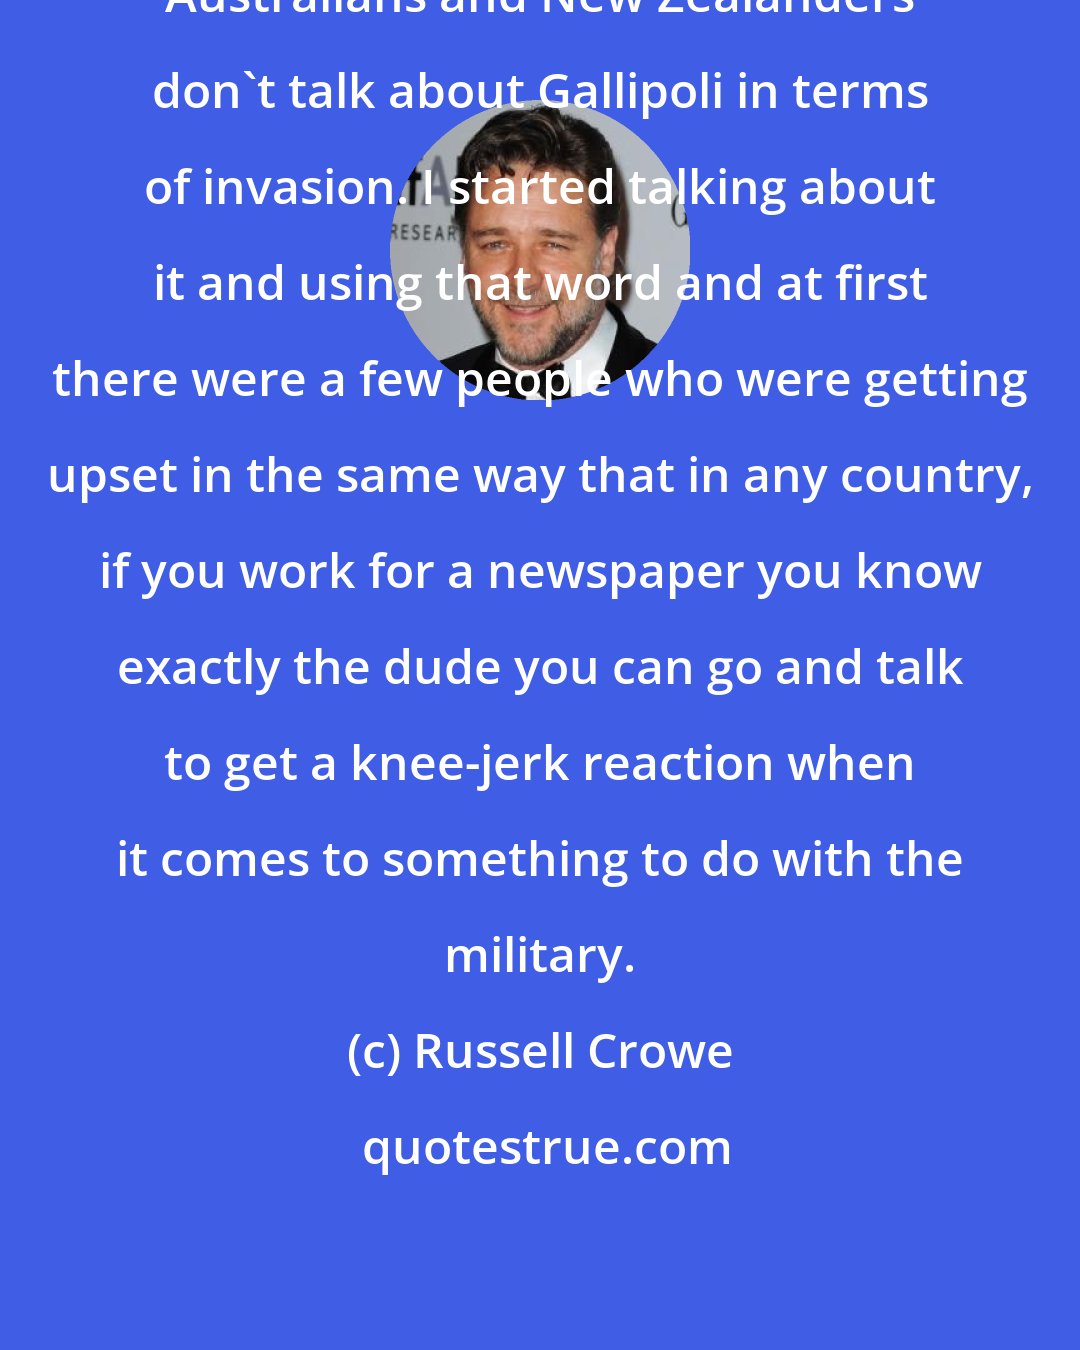 Russell Crowe: Australians and New Zealanders don't talk about Gallipoli in terms of invasion. I started talking about it and using that word and at first there were a few people who were getting upset in the same way that in any country, if you work for a newspaper you know exactly the dude you can go and talk to get a knee-jerk reaction when it comes to something to do with the military.